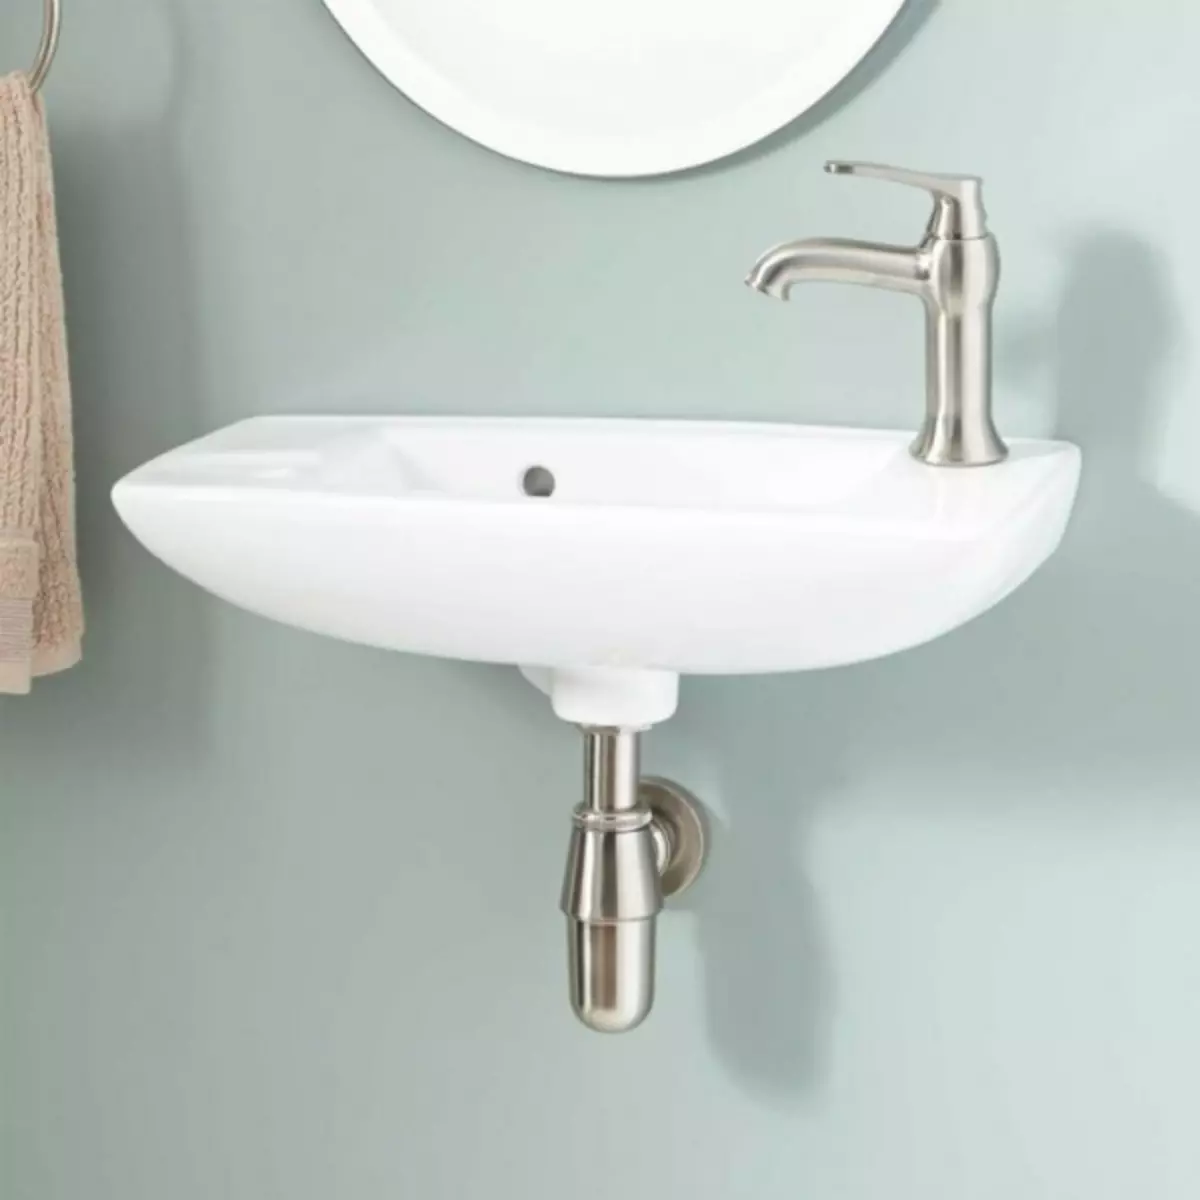 Bathroom sink - 105 photos of the best new products from the catalog